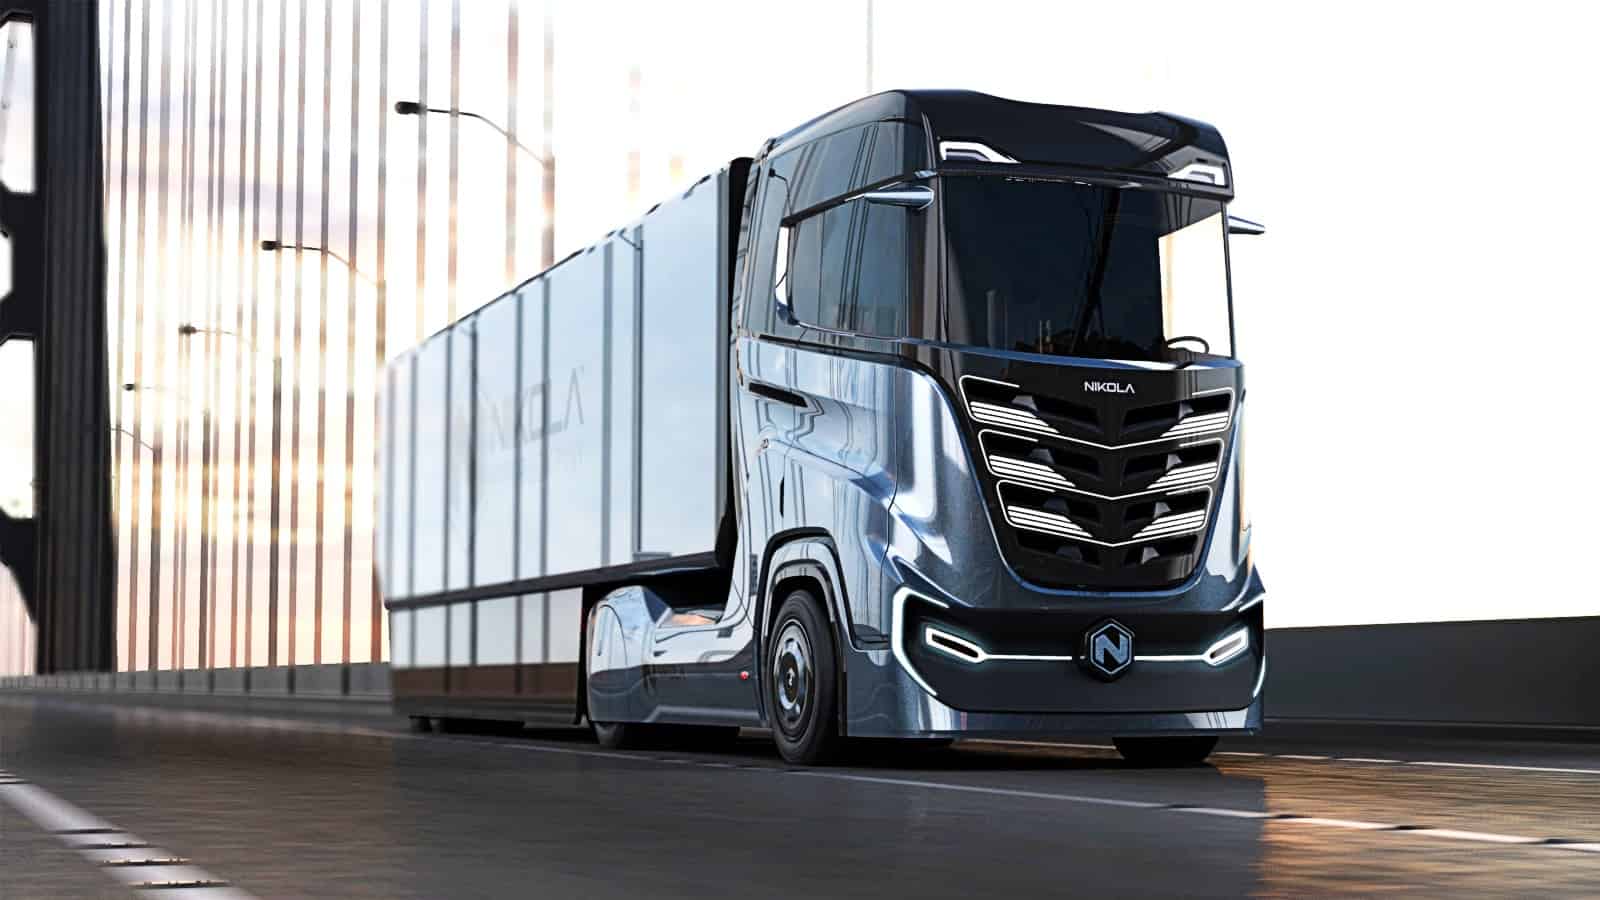 Nikola to acquire battery pack supplier Romeo Power in $144 million deal